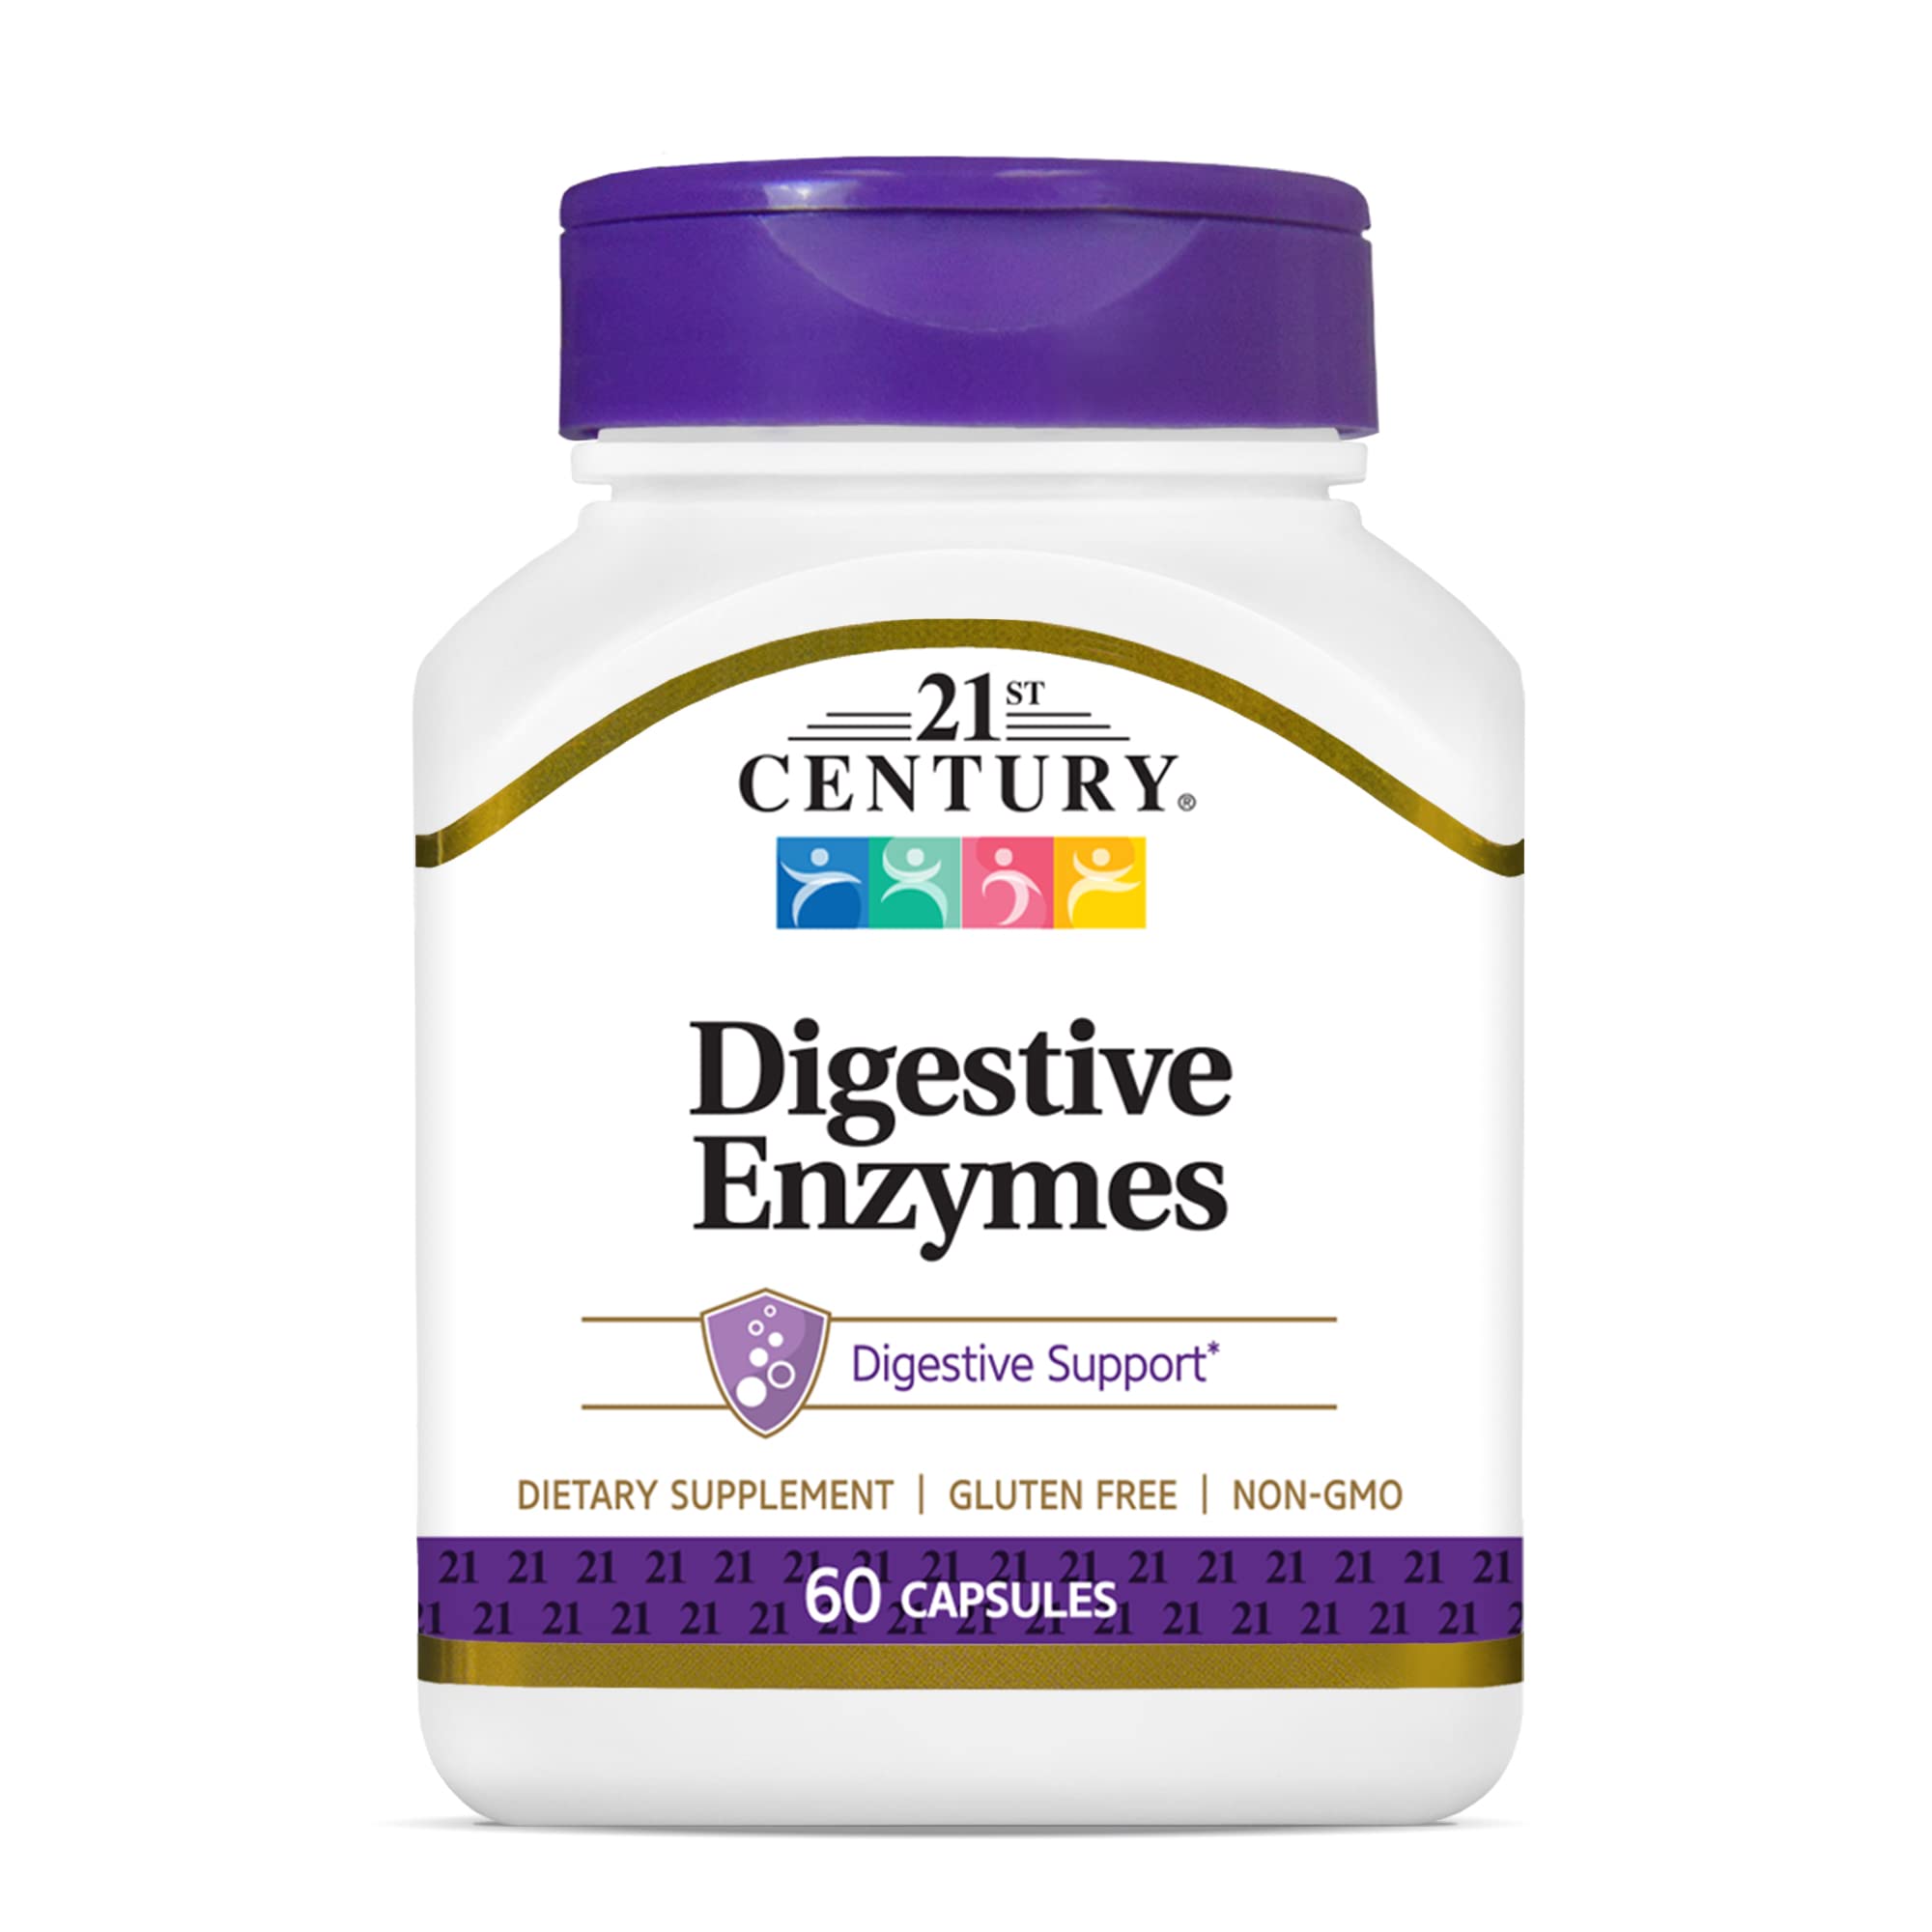 21st Century Digestive Enzymes Capsules, 60 Count (Pack of 2)